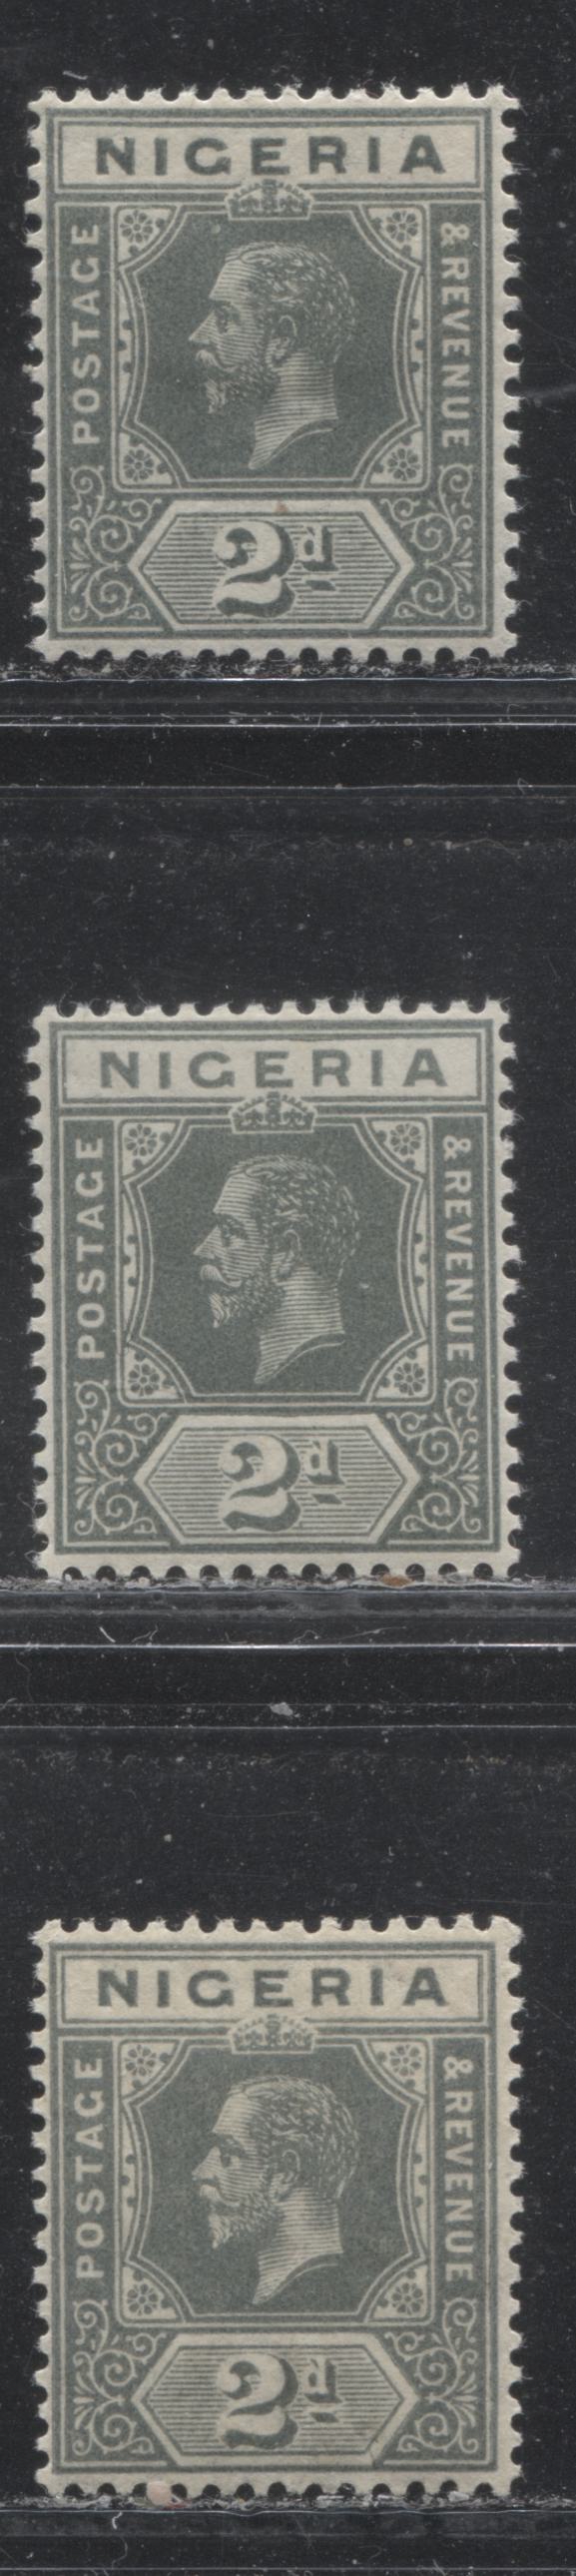 Lot 181 Nigeria SG# 3a 2d Slate Grey King George V, 1914-1921 Multiple Crown CA Imperium Keyplate Issue, Three VFOG Examples, From Different Printings, Each a Slightly Different Shade